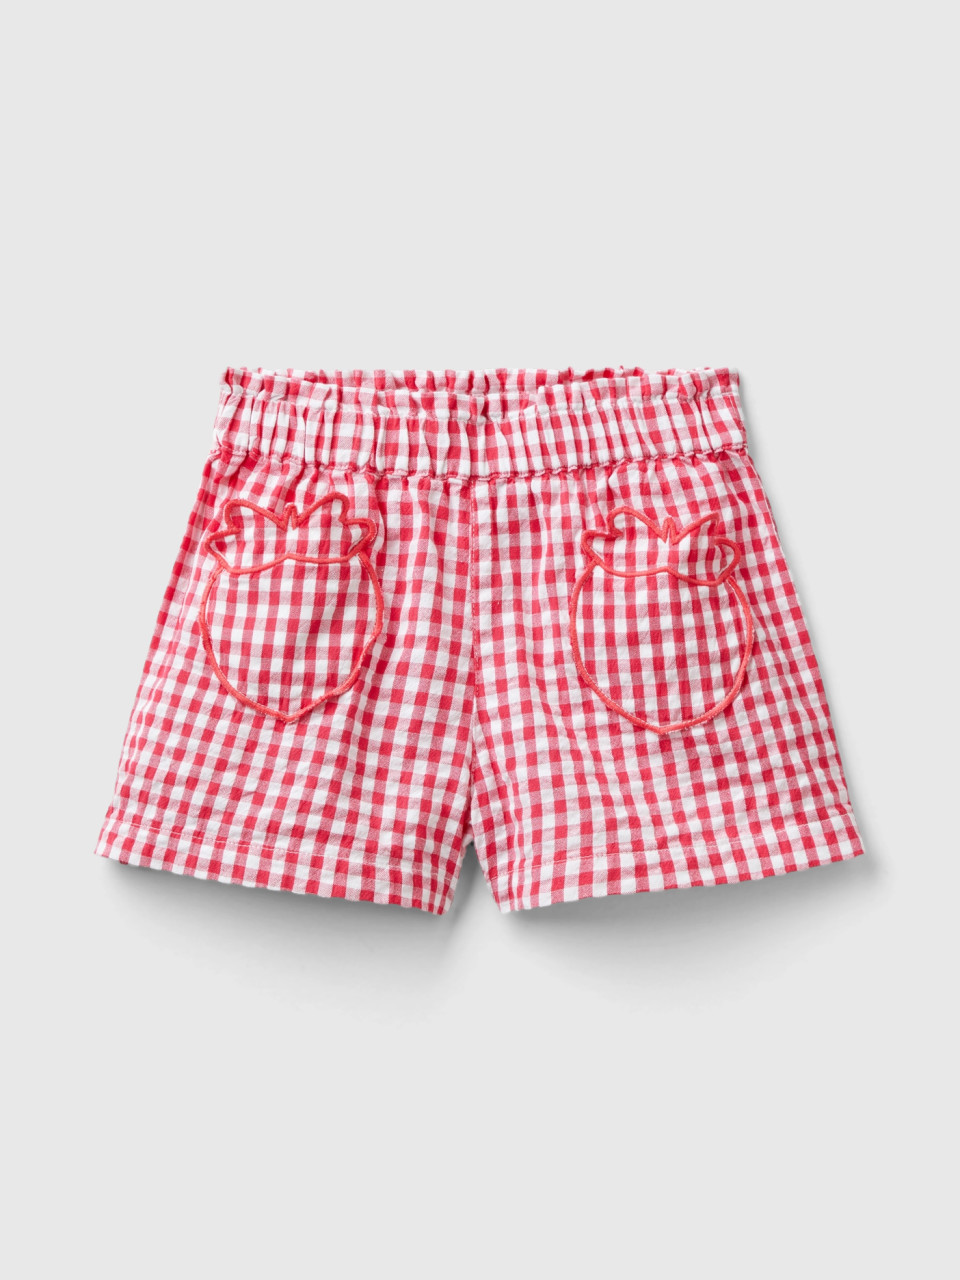 Benetton, Vichy Bermuda Shorts With Fruit Pockets, Red, Kids